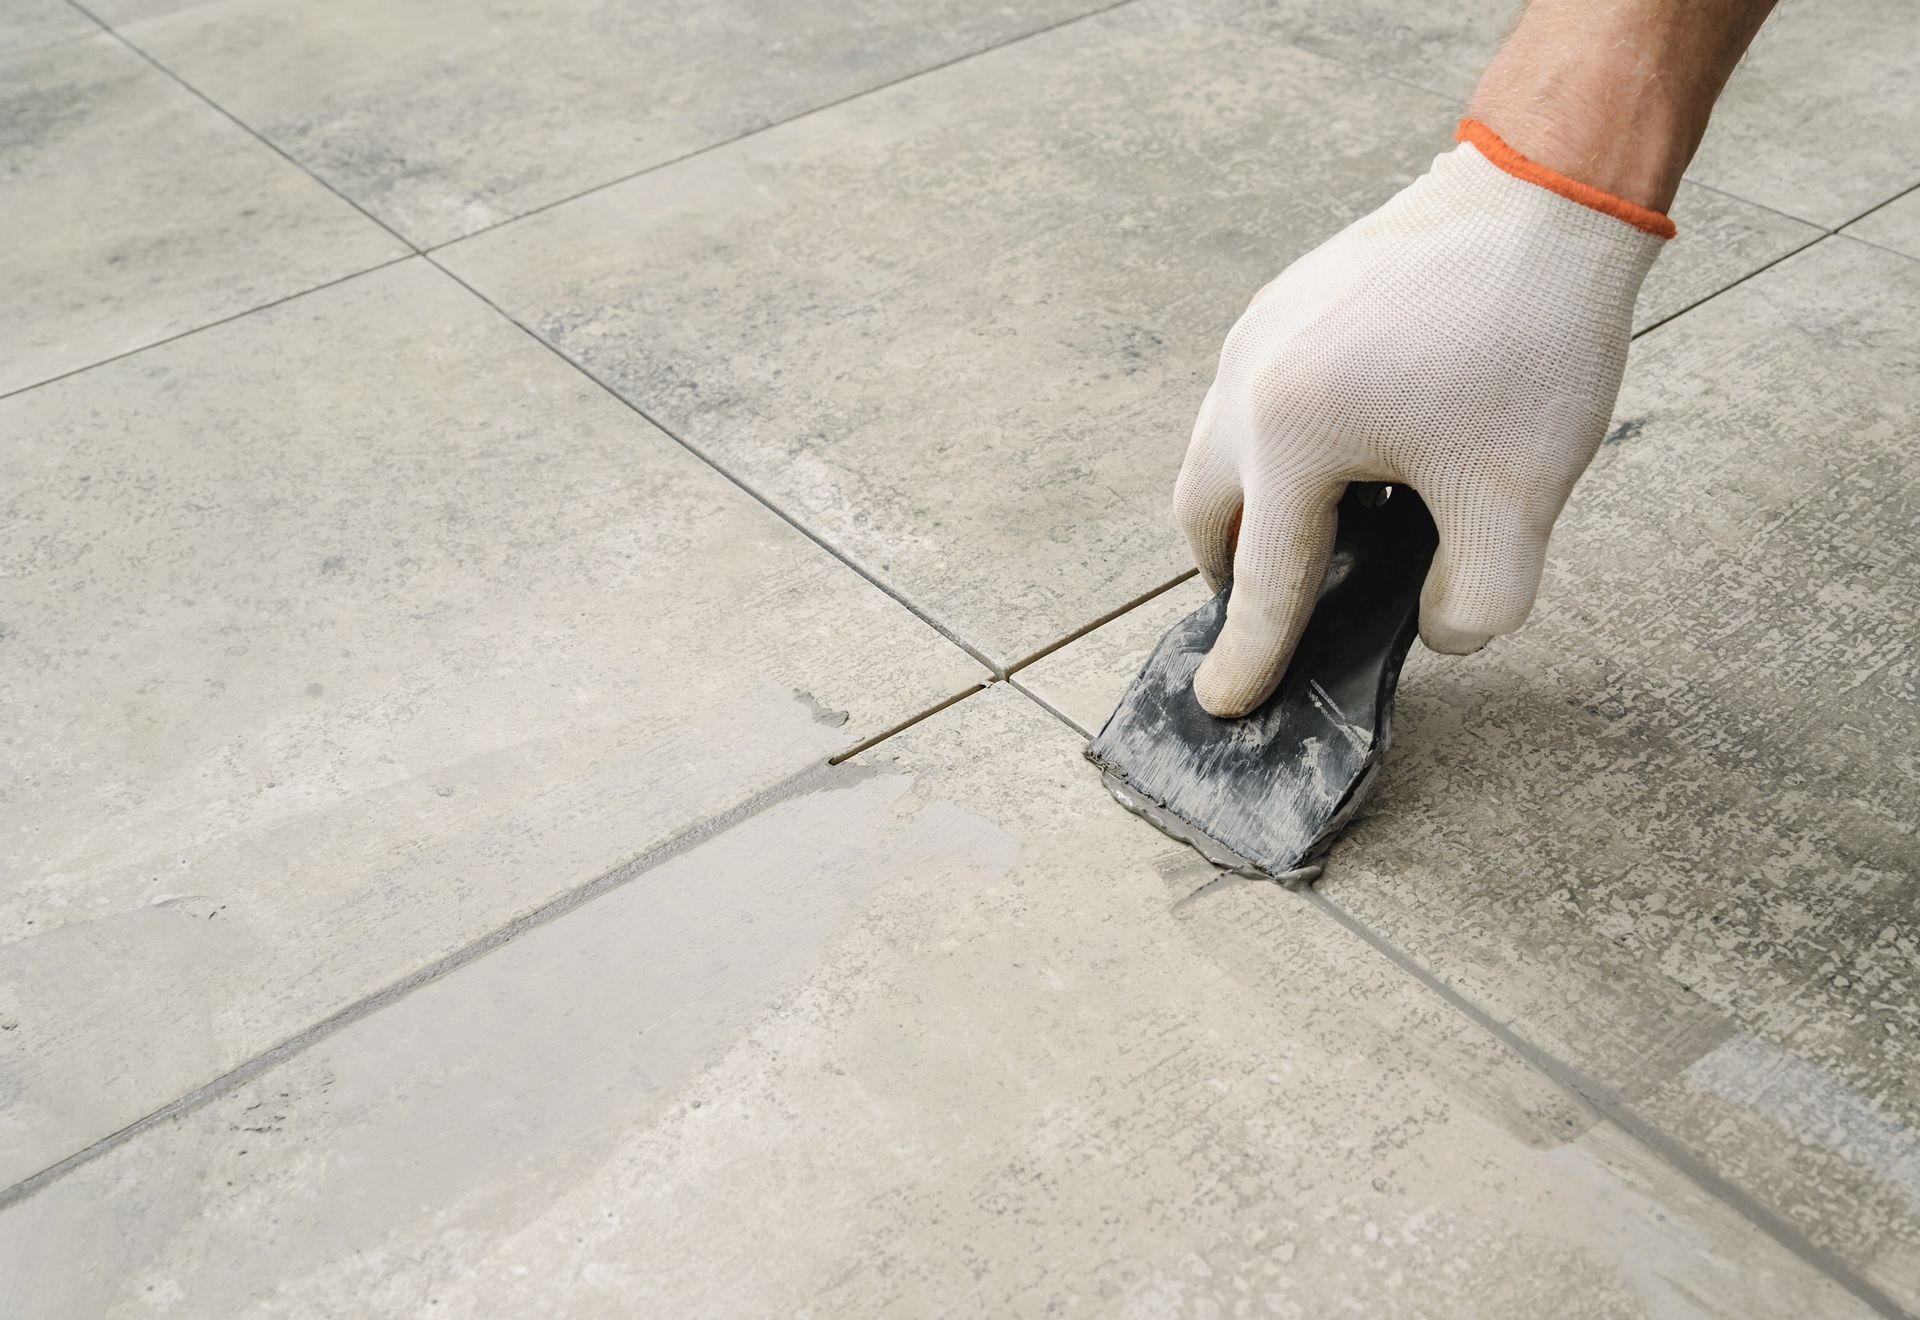 a person wearing a white glove is applying grout on a tile floor